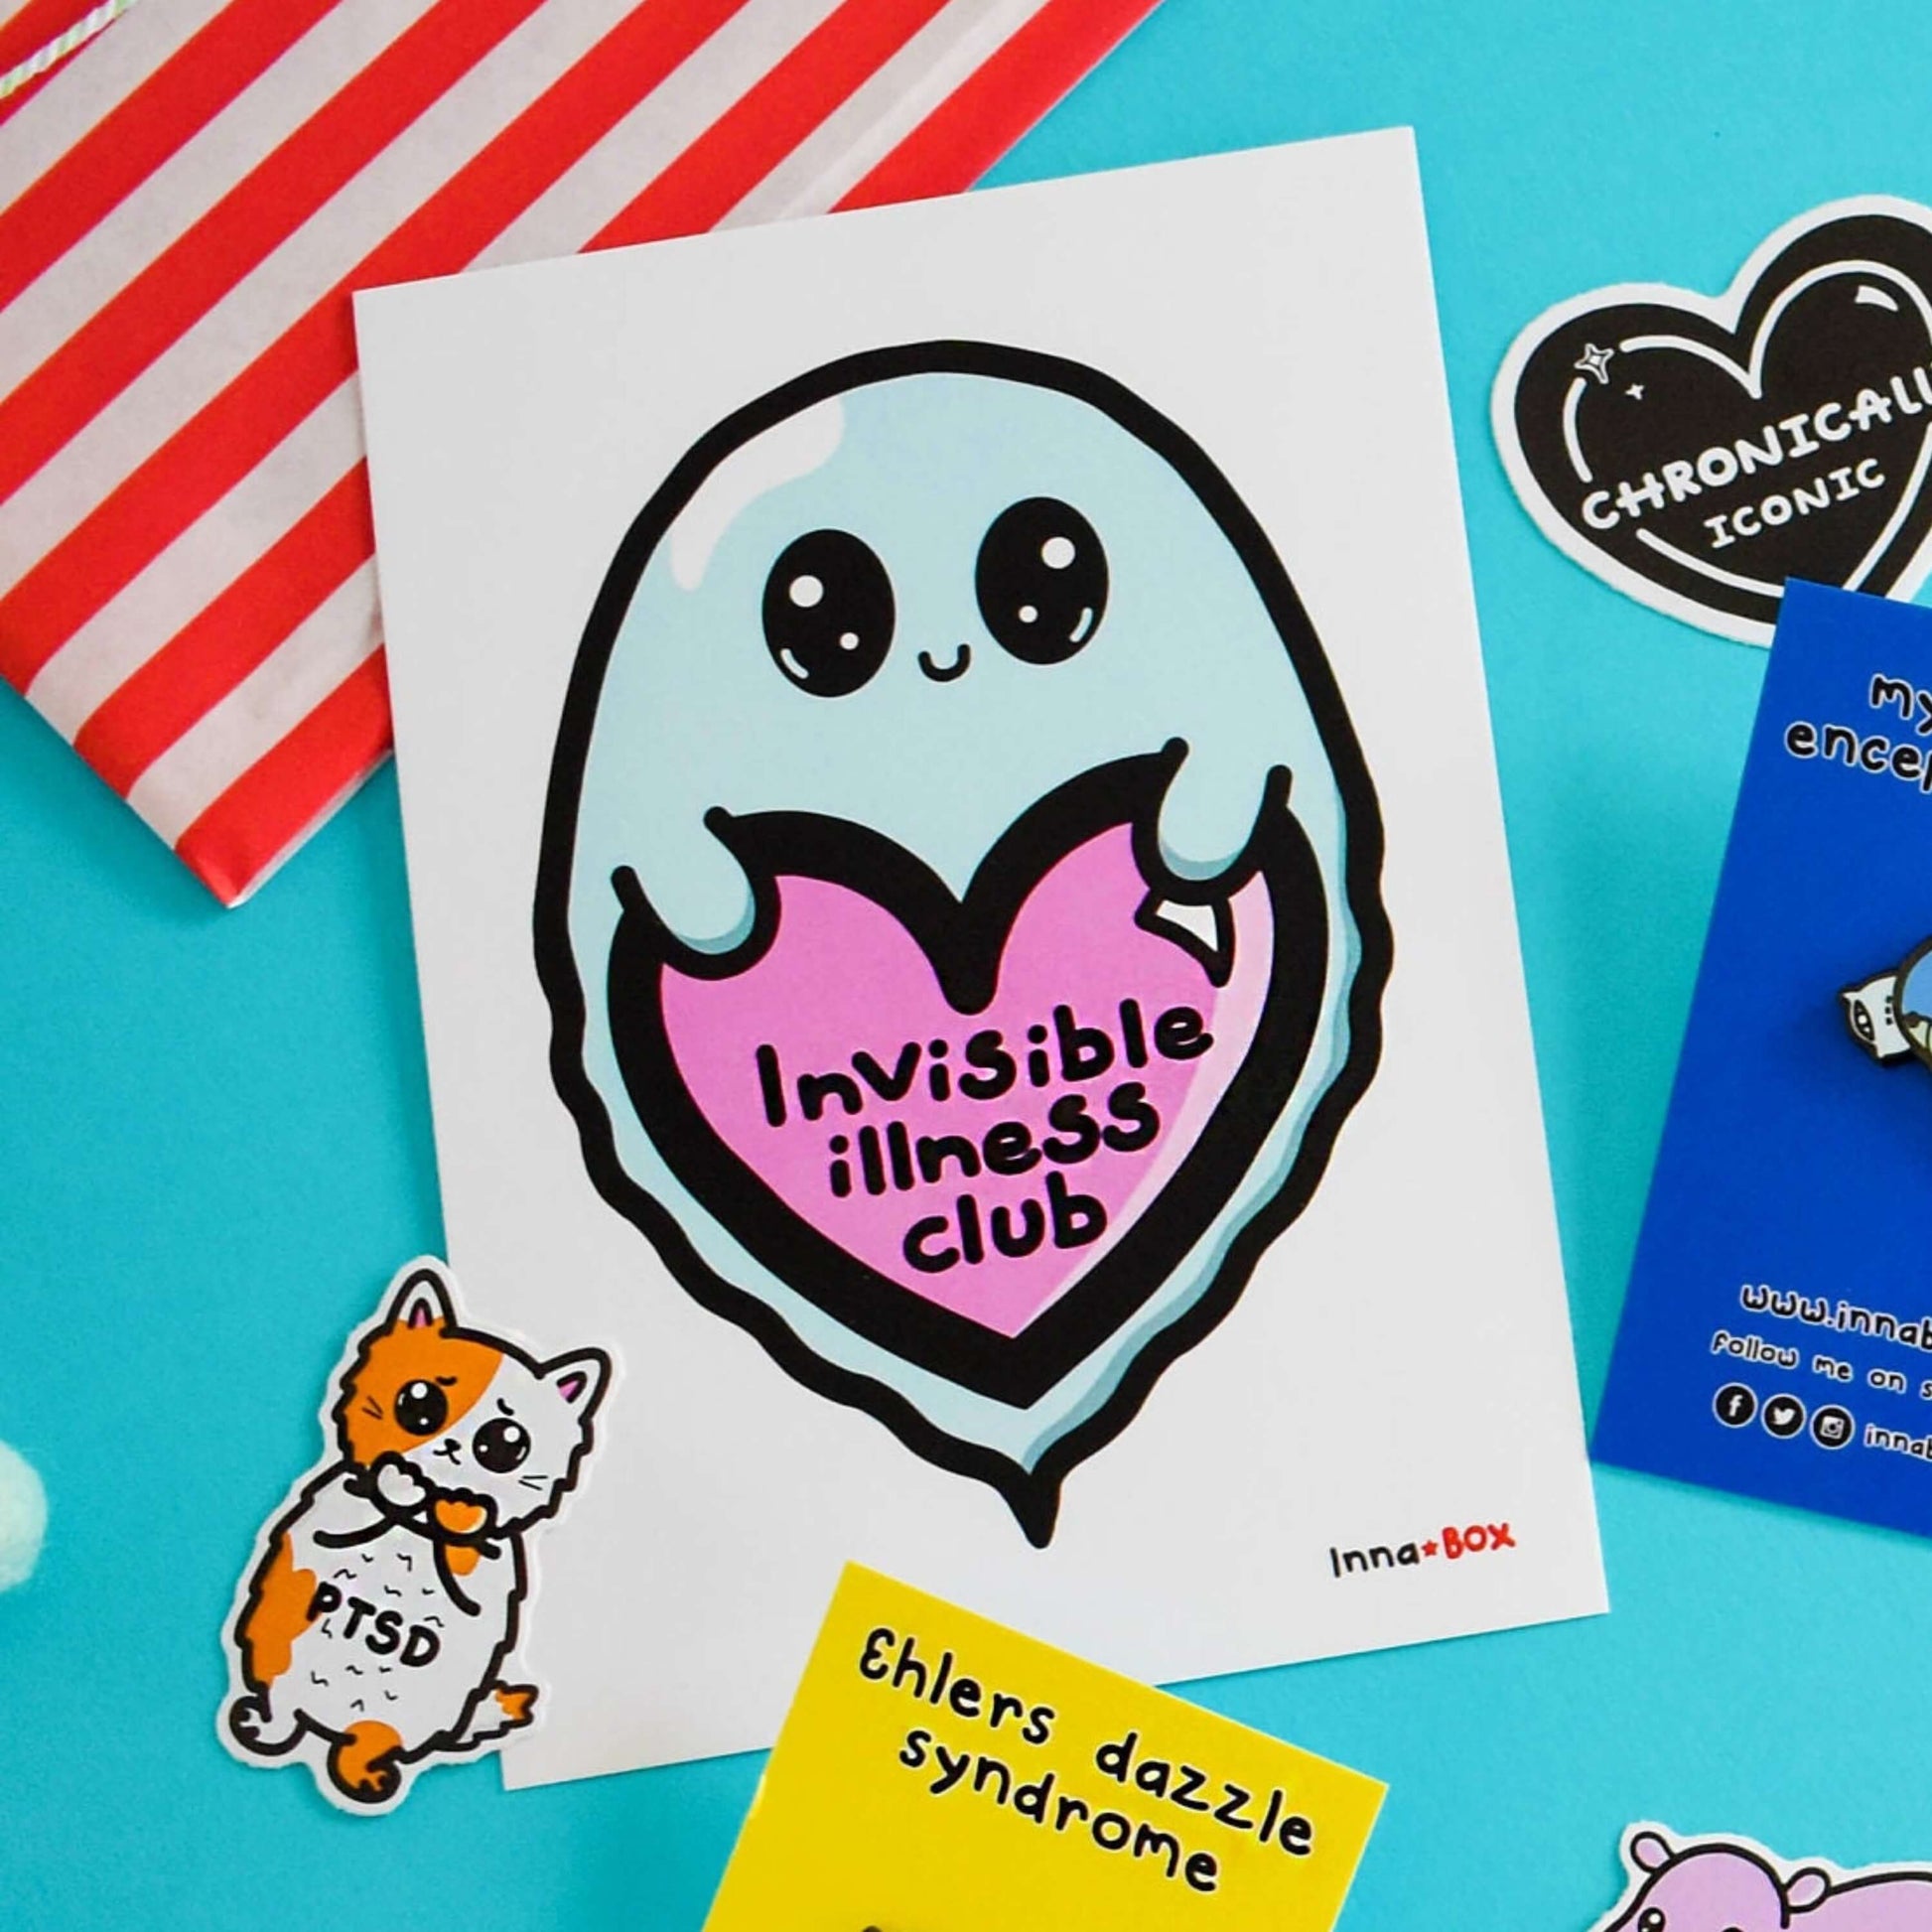 The Invisible Illness Club Postcard on a blue background with other innabox products. The white postcard print features a pastel blue smiling ghost with big sparkly eyes holding up a pink heart with black text reading 'invisible illness club' with the innabox logo in the bottom right corner. The hand drawn design is raising awareness for hidden disabilities and chronic illness.